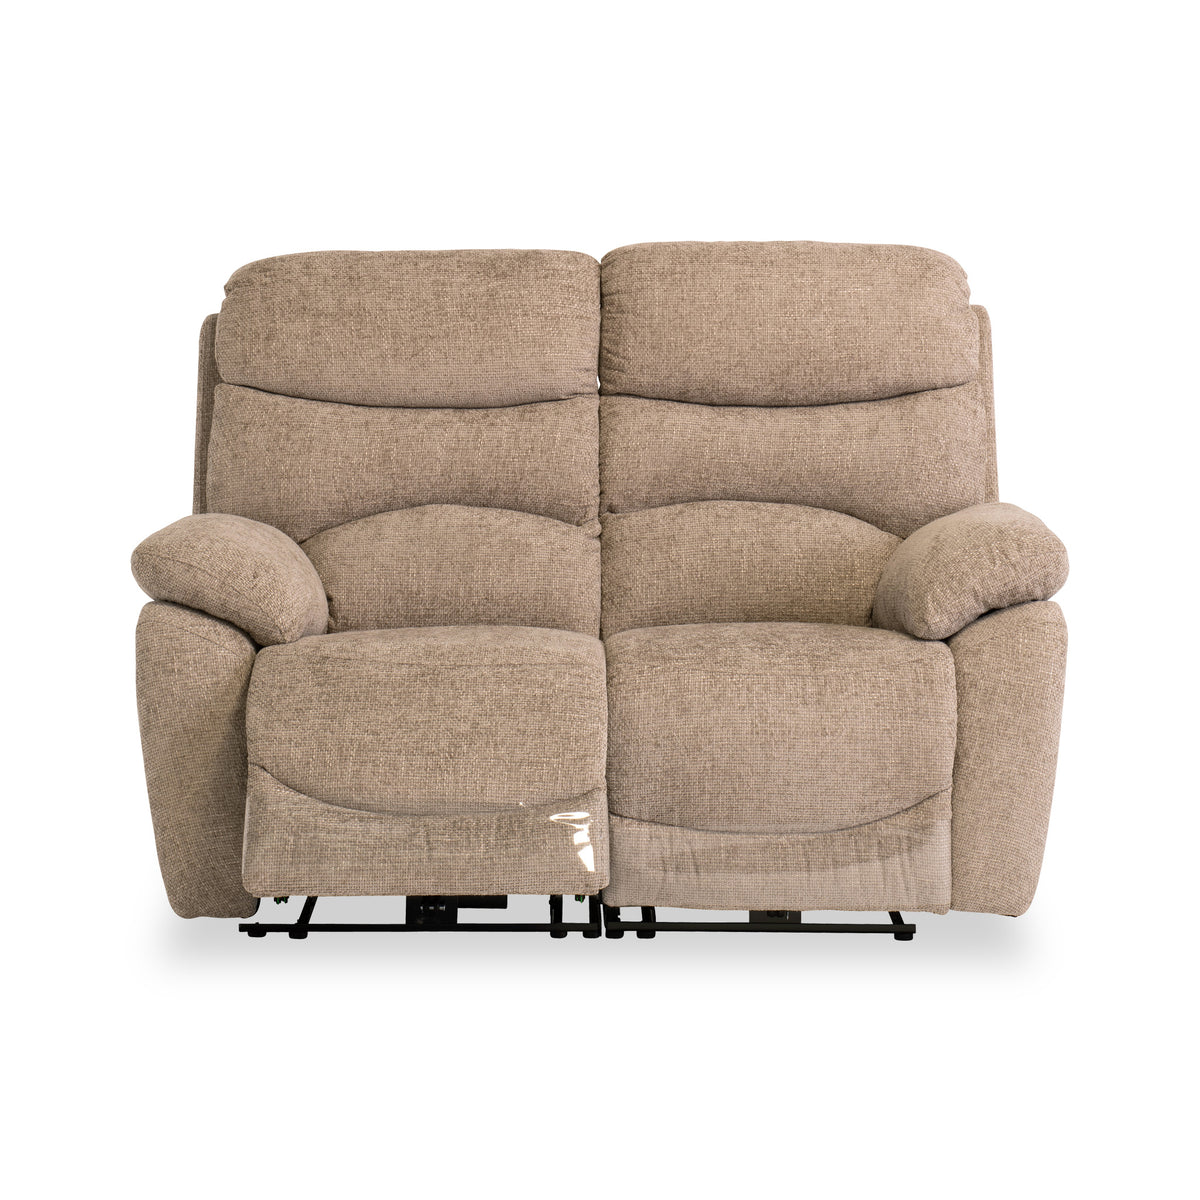 Seville Sand Fabric Electric Reclining 2 Seater Sofa from Roseland Furniture